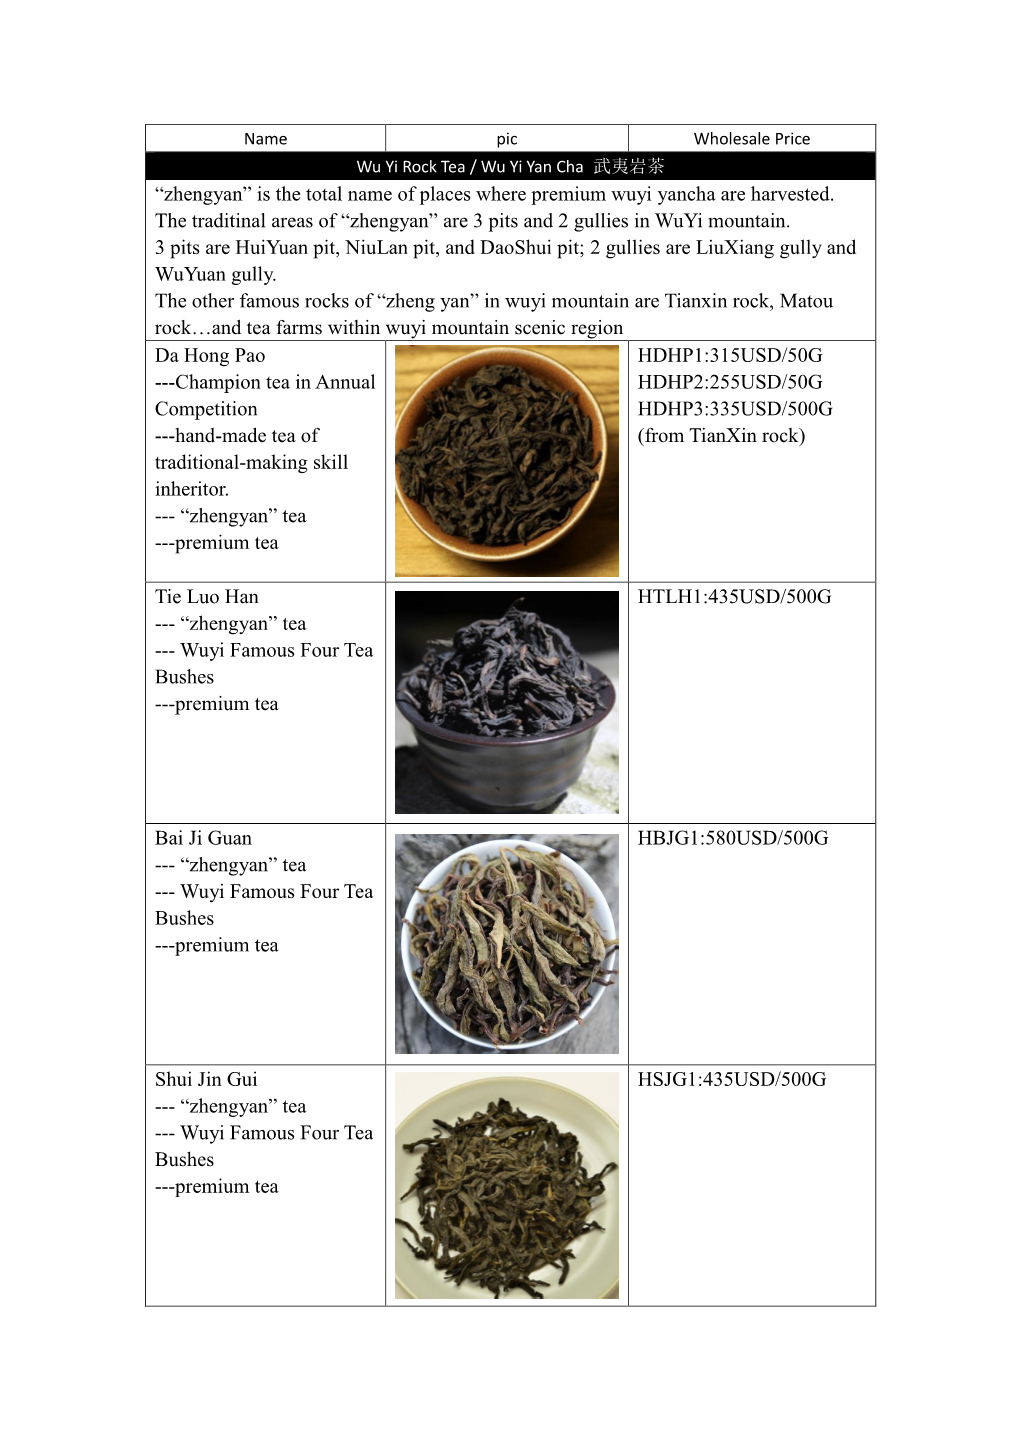 Is the Total Name of Places Where Premium Wuyi Yancha Are Harvested